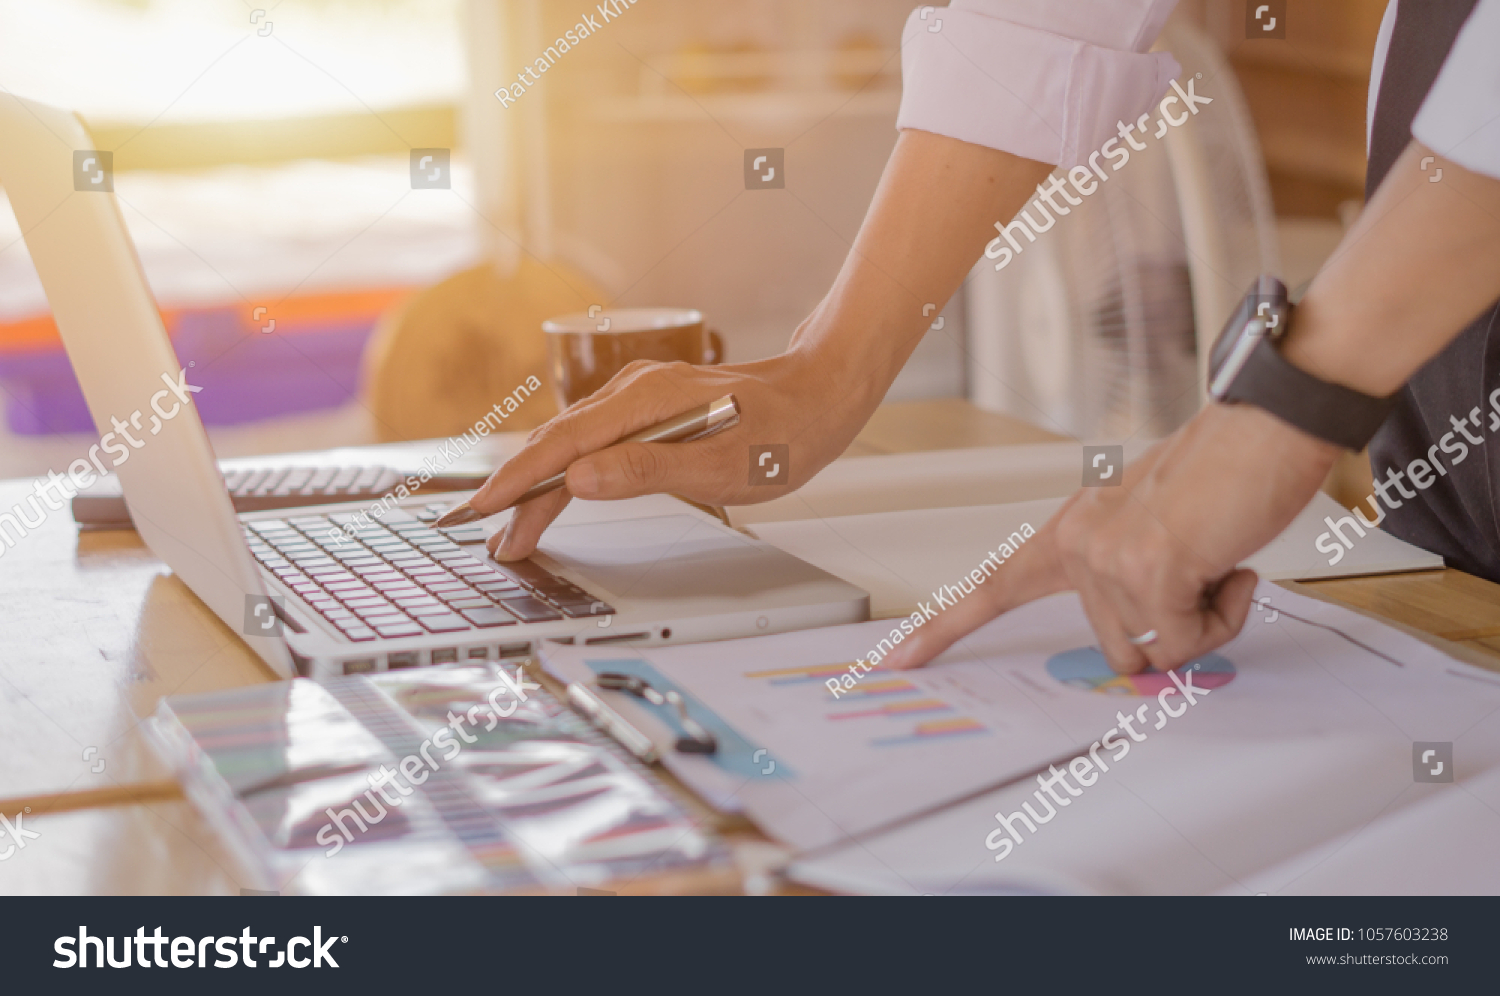 Business man working at office with laptop, tablet and graph data documents on his desk. #1057603238